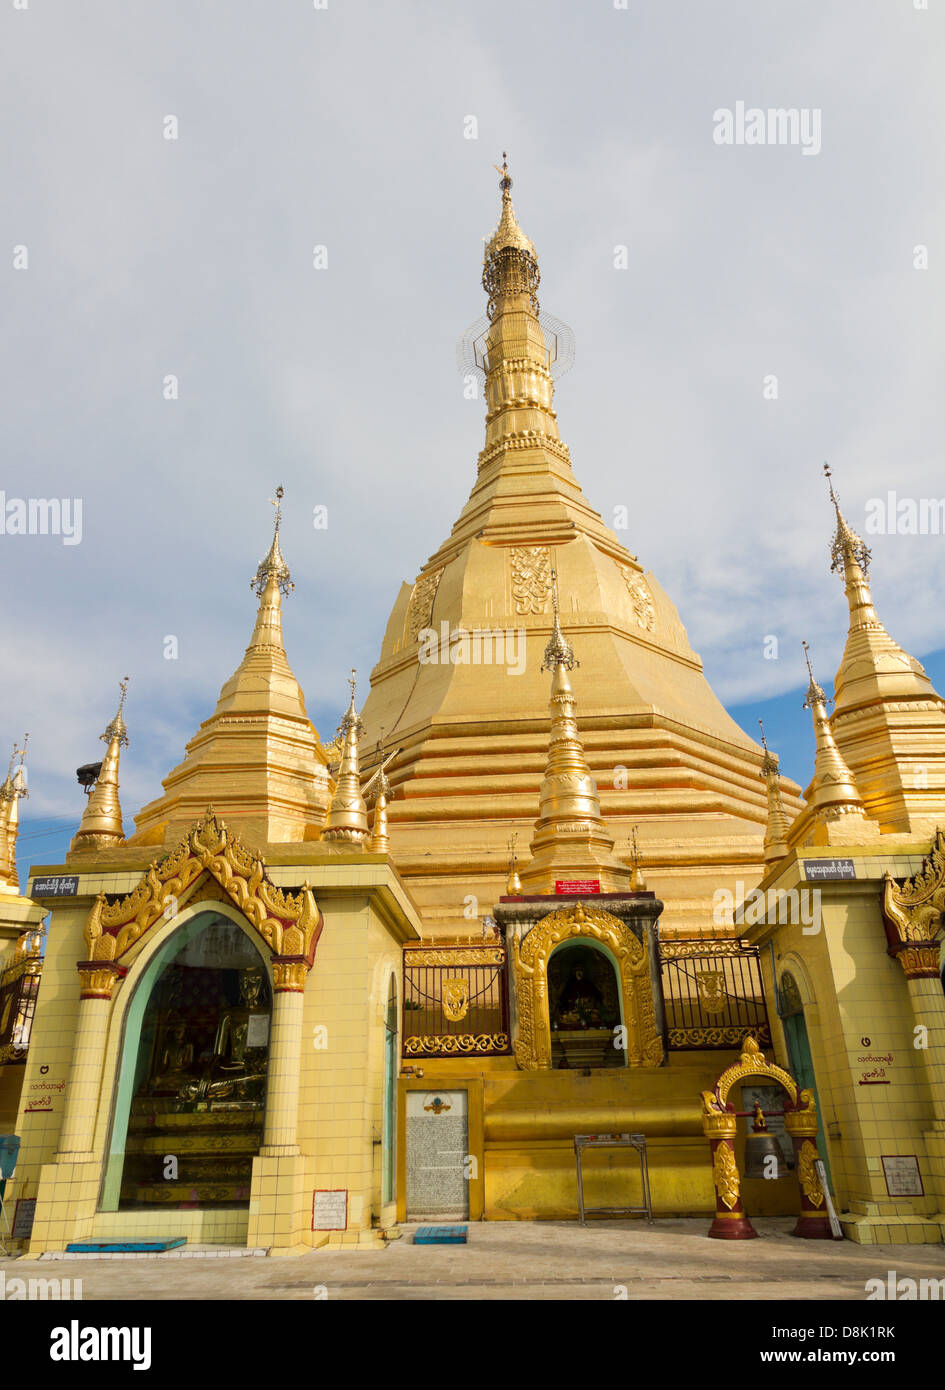 Golden Sule pagoda with shrine and peace bell in Burma, Yangon, Stock Photo